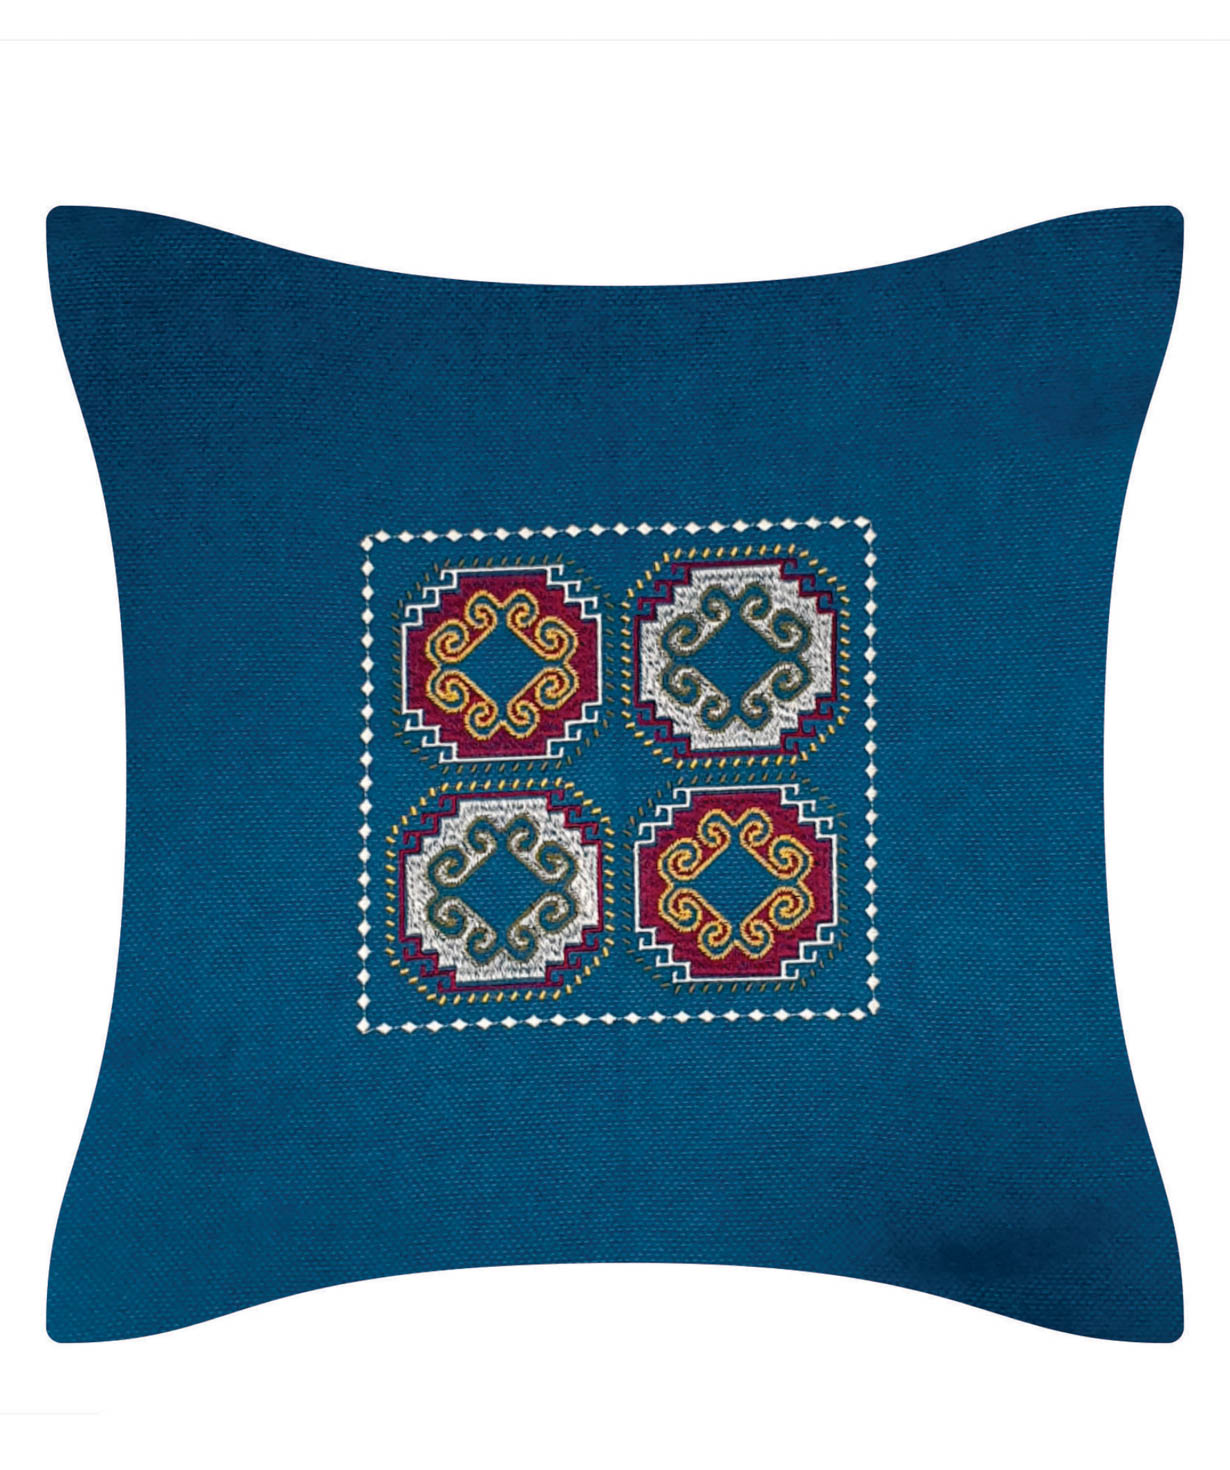 Pillow `Miskaryan heritage` embroidered with Armenian ornament №32